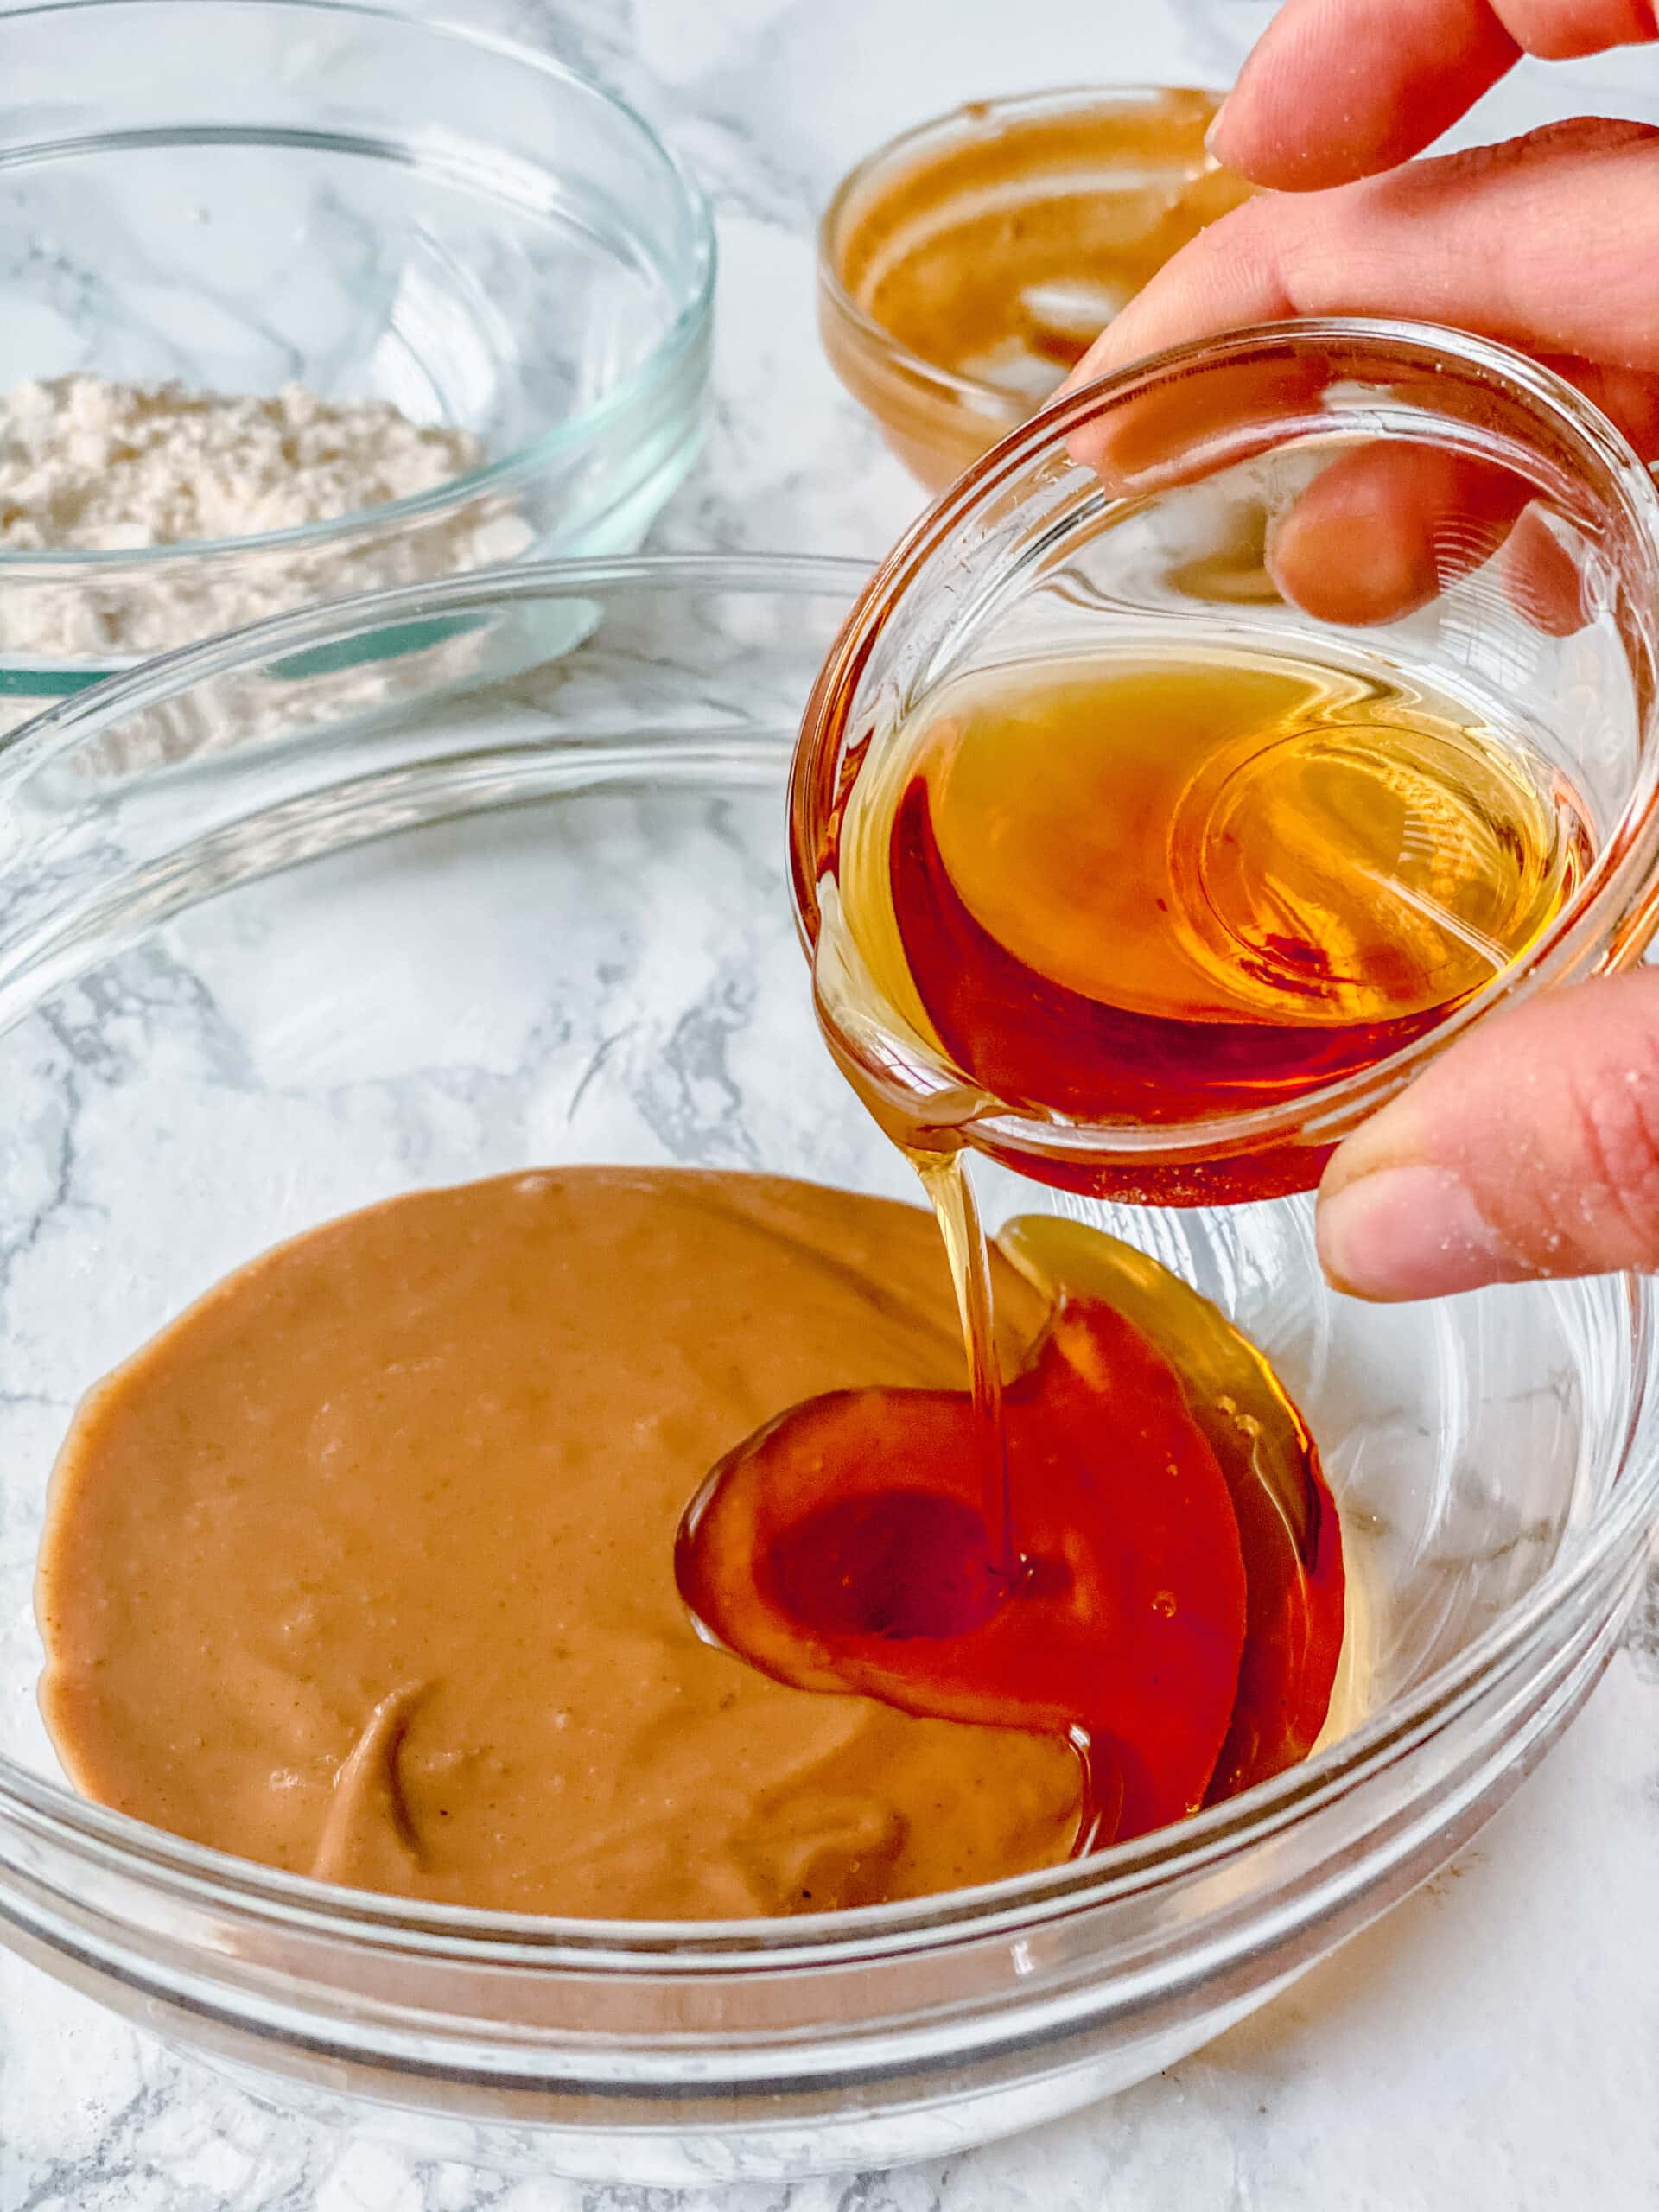 Assorted glass bowls filled with ingredients to make simple peanut butter cookies. A hand is holding the smallest bowl and pouring maple syrup into the larger bowl full of peanut butter.